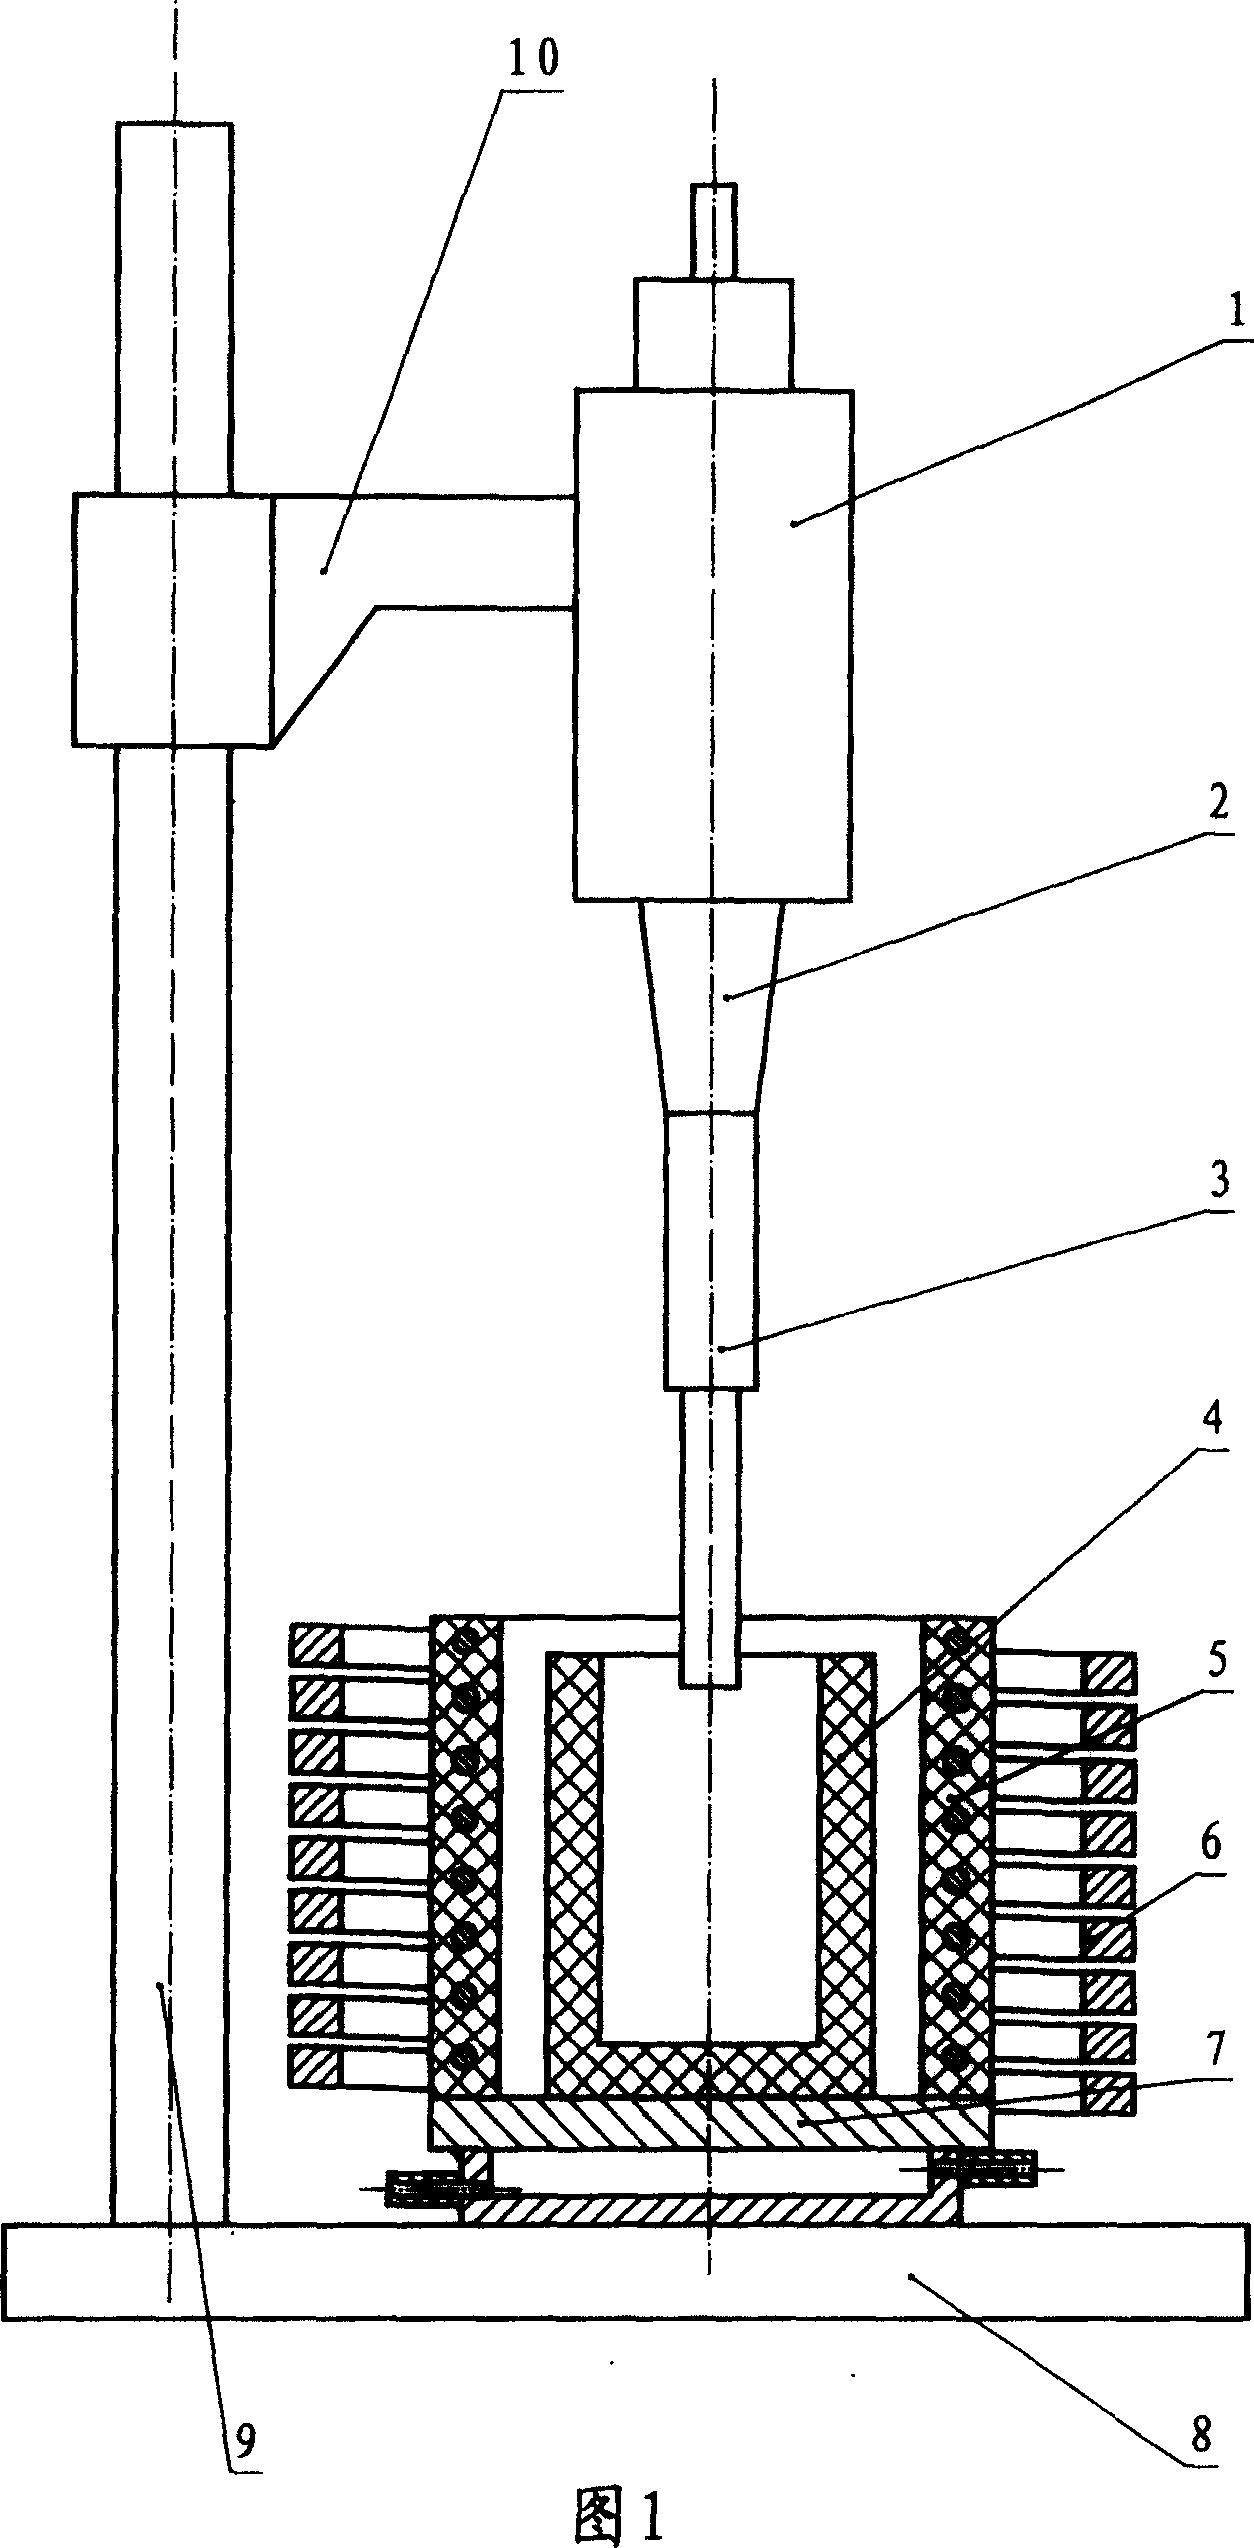 Method for preparing nanocystalline ingot casting by magnetic field and ultrasonic combined treatment of metal melt and dedicated apparatus therefor